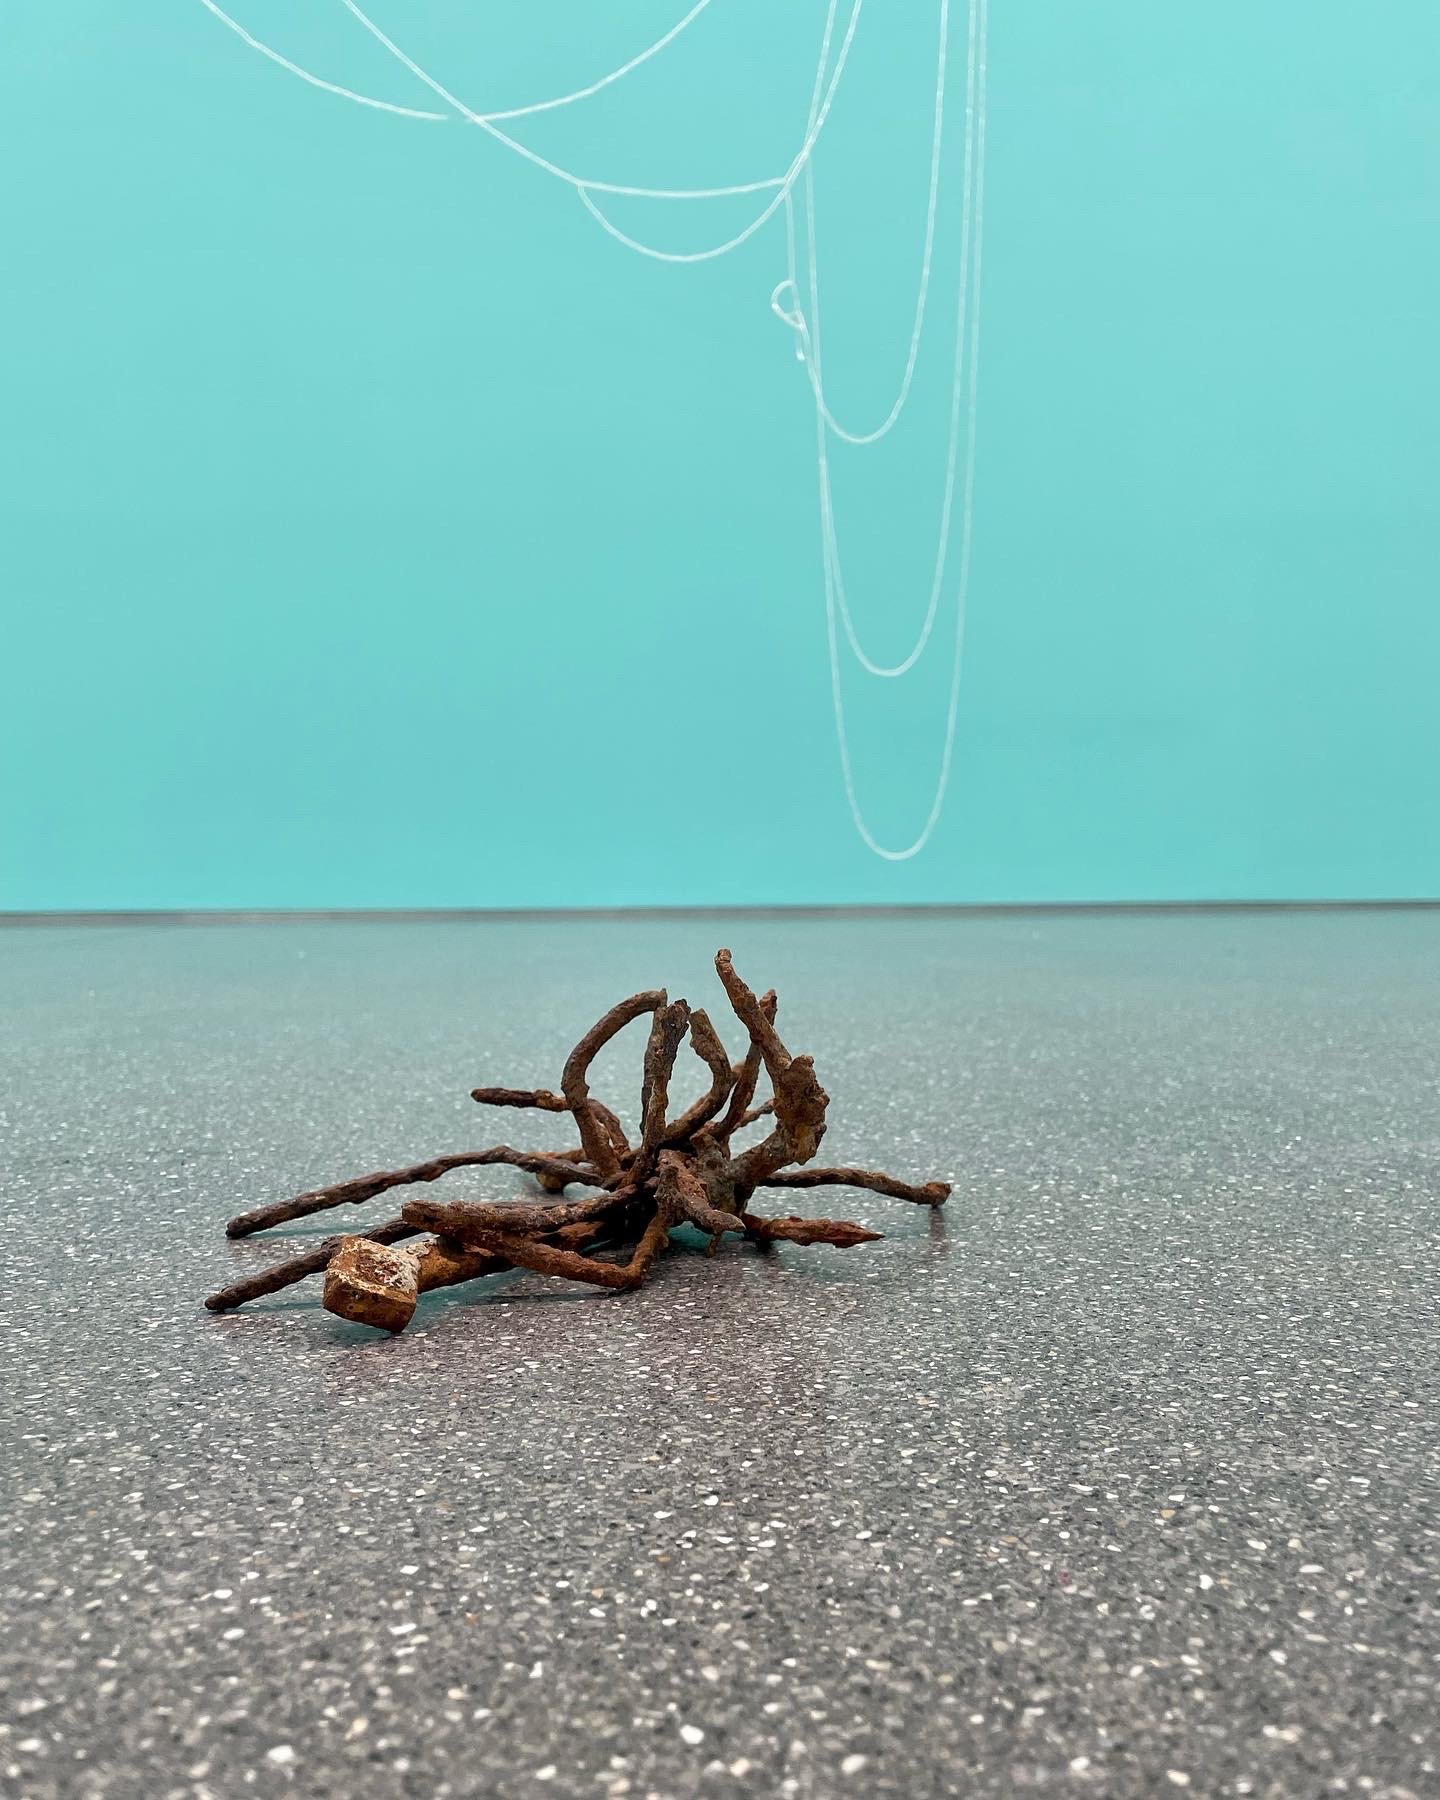  Making Waves   Installation with ‘Atoms of Delight’ (glass beads and nylon thread), ‘Small Fires’(nails and magnets) and wall paint  at Bündner Kunstmuseum, Chur  